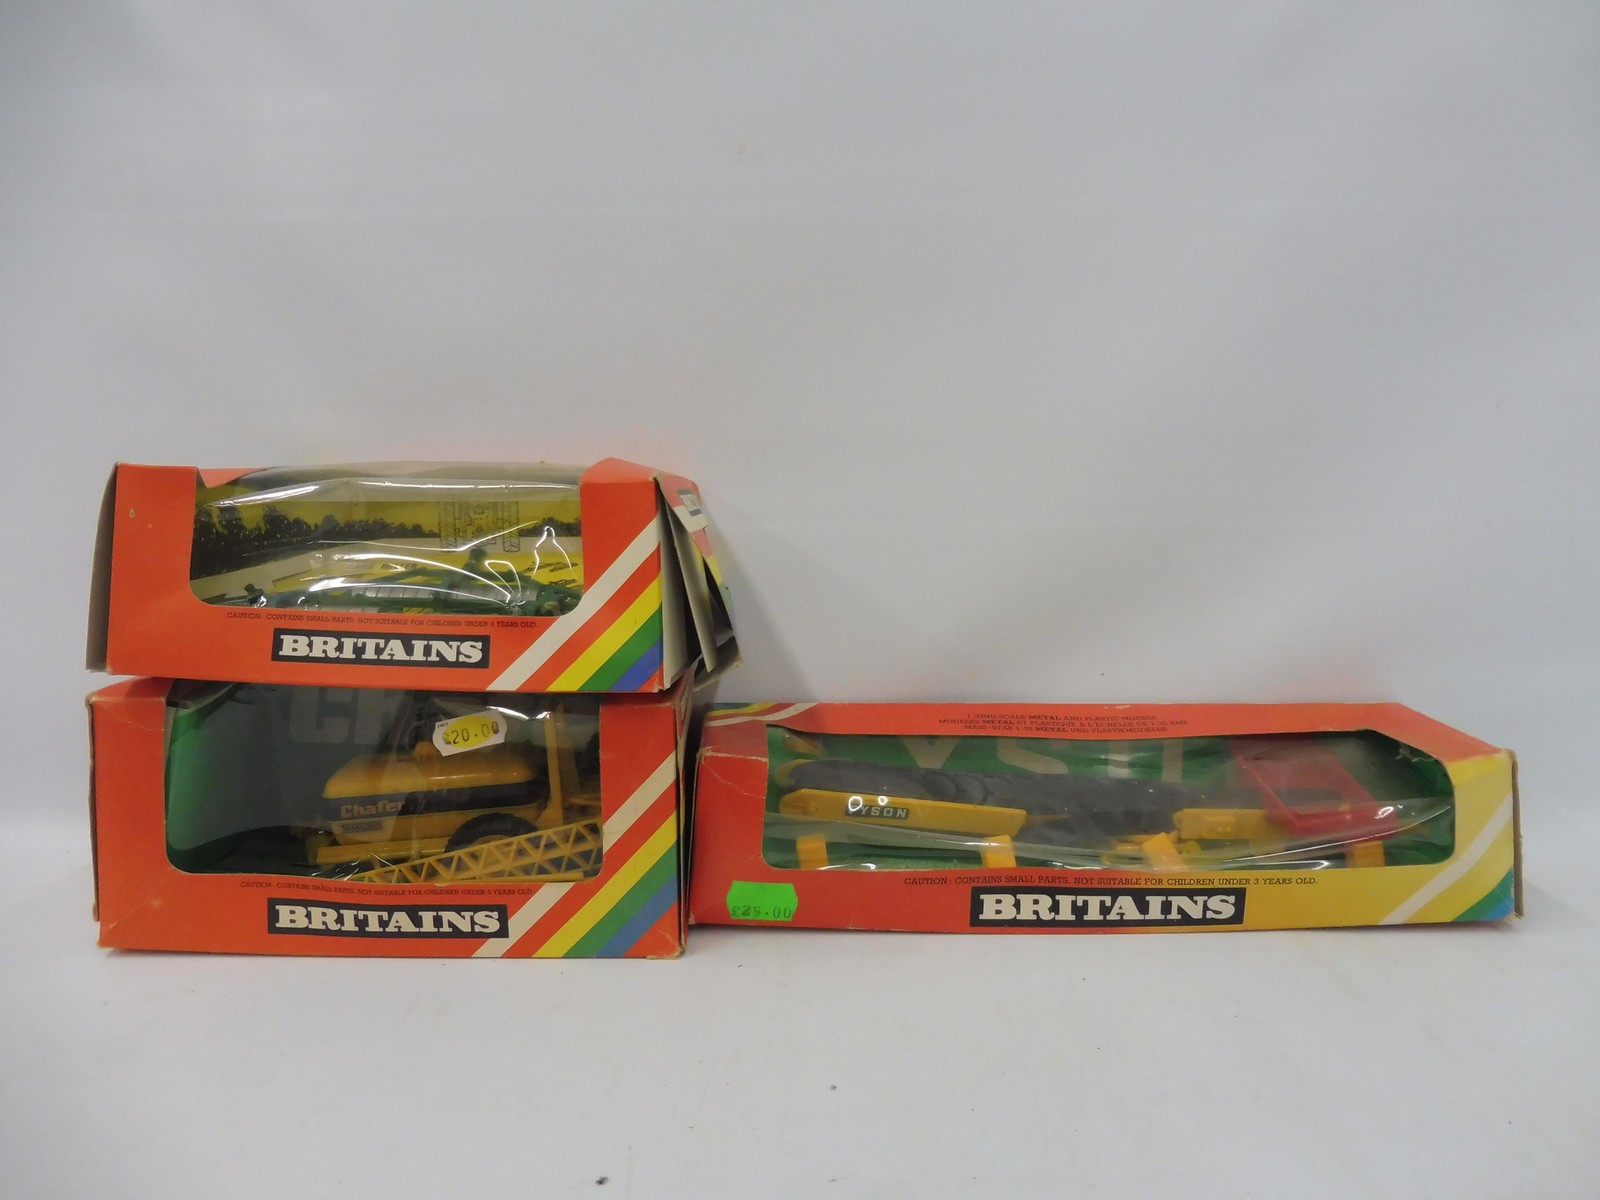 Three boxed Britains Farm Implements and Accessories - no. 9579 Elevator, 9507 Sprayer and a 9554